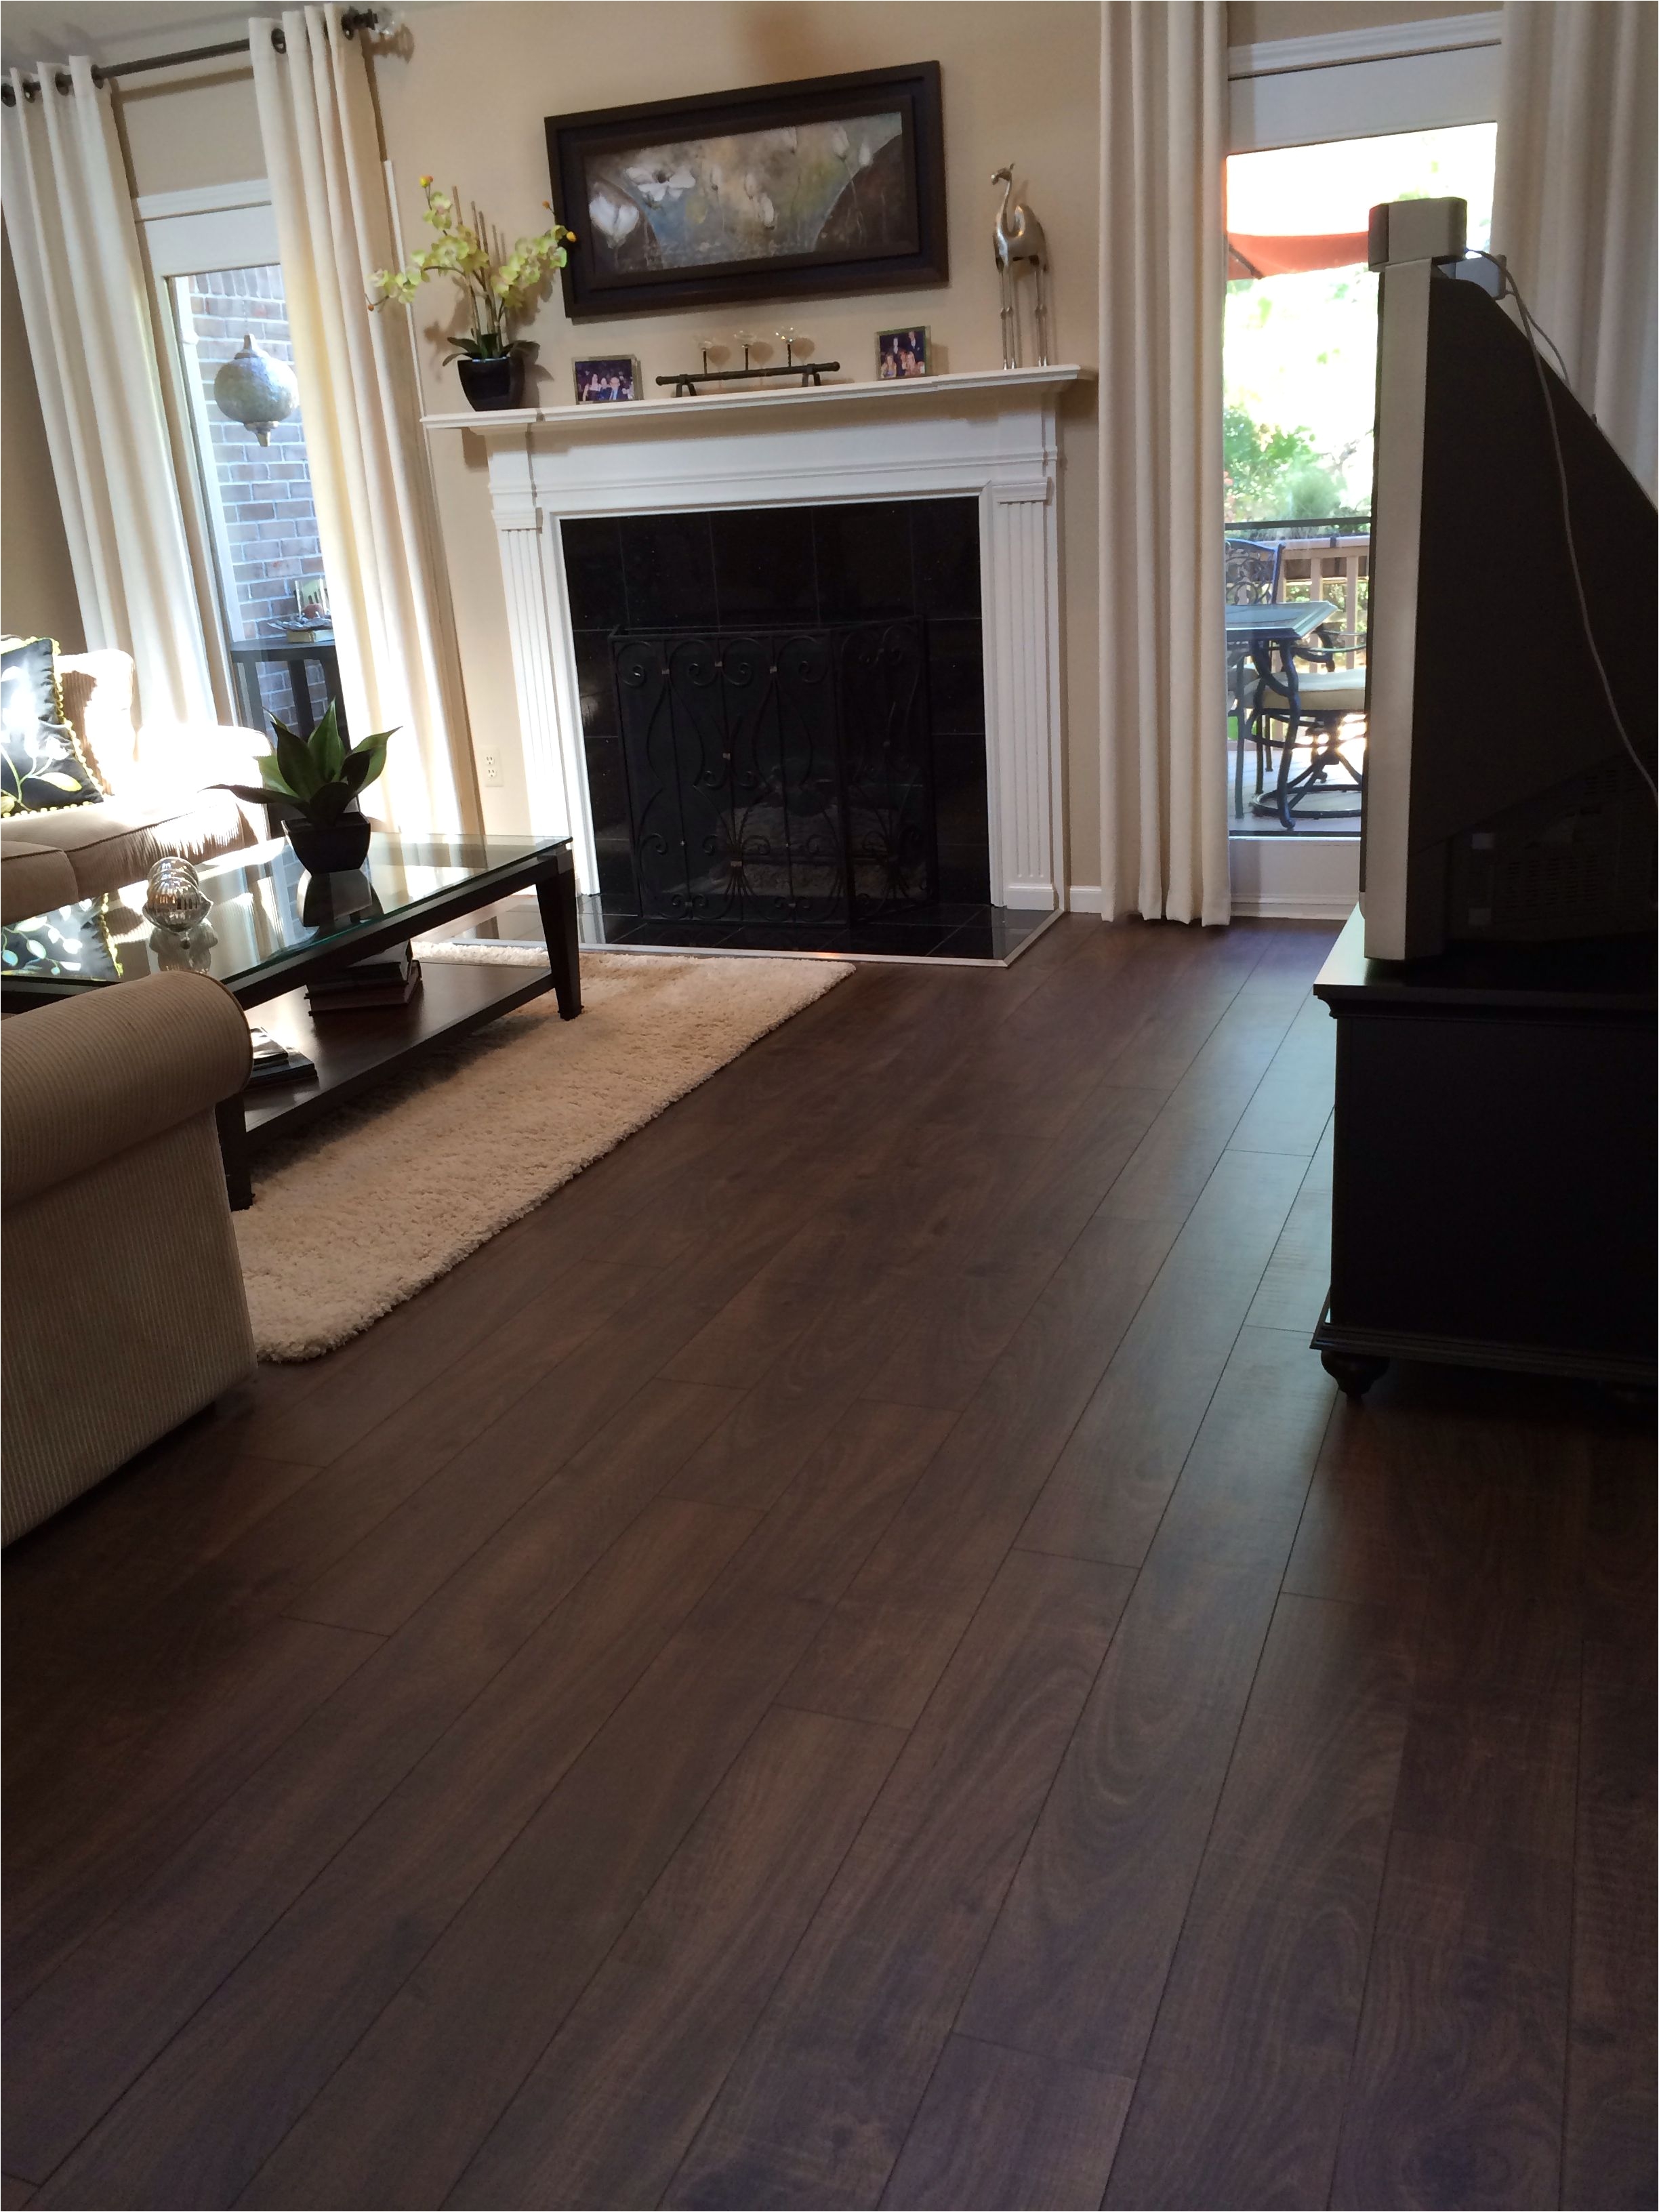 Does Pergo Flooring Ever Go On Sale We are Inspired by Laminate Floor Ideas for More Inspiration Visit